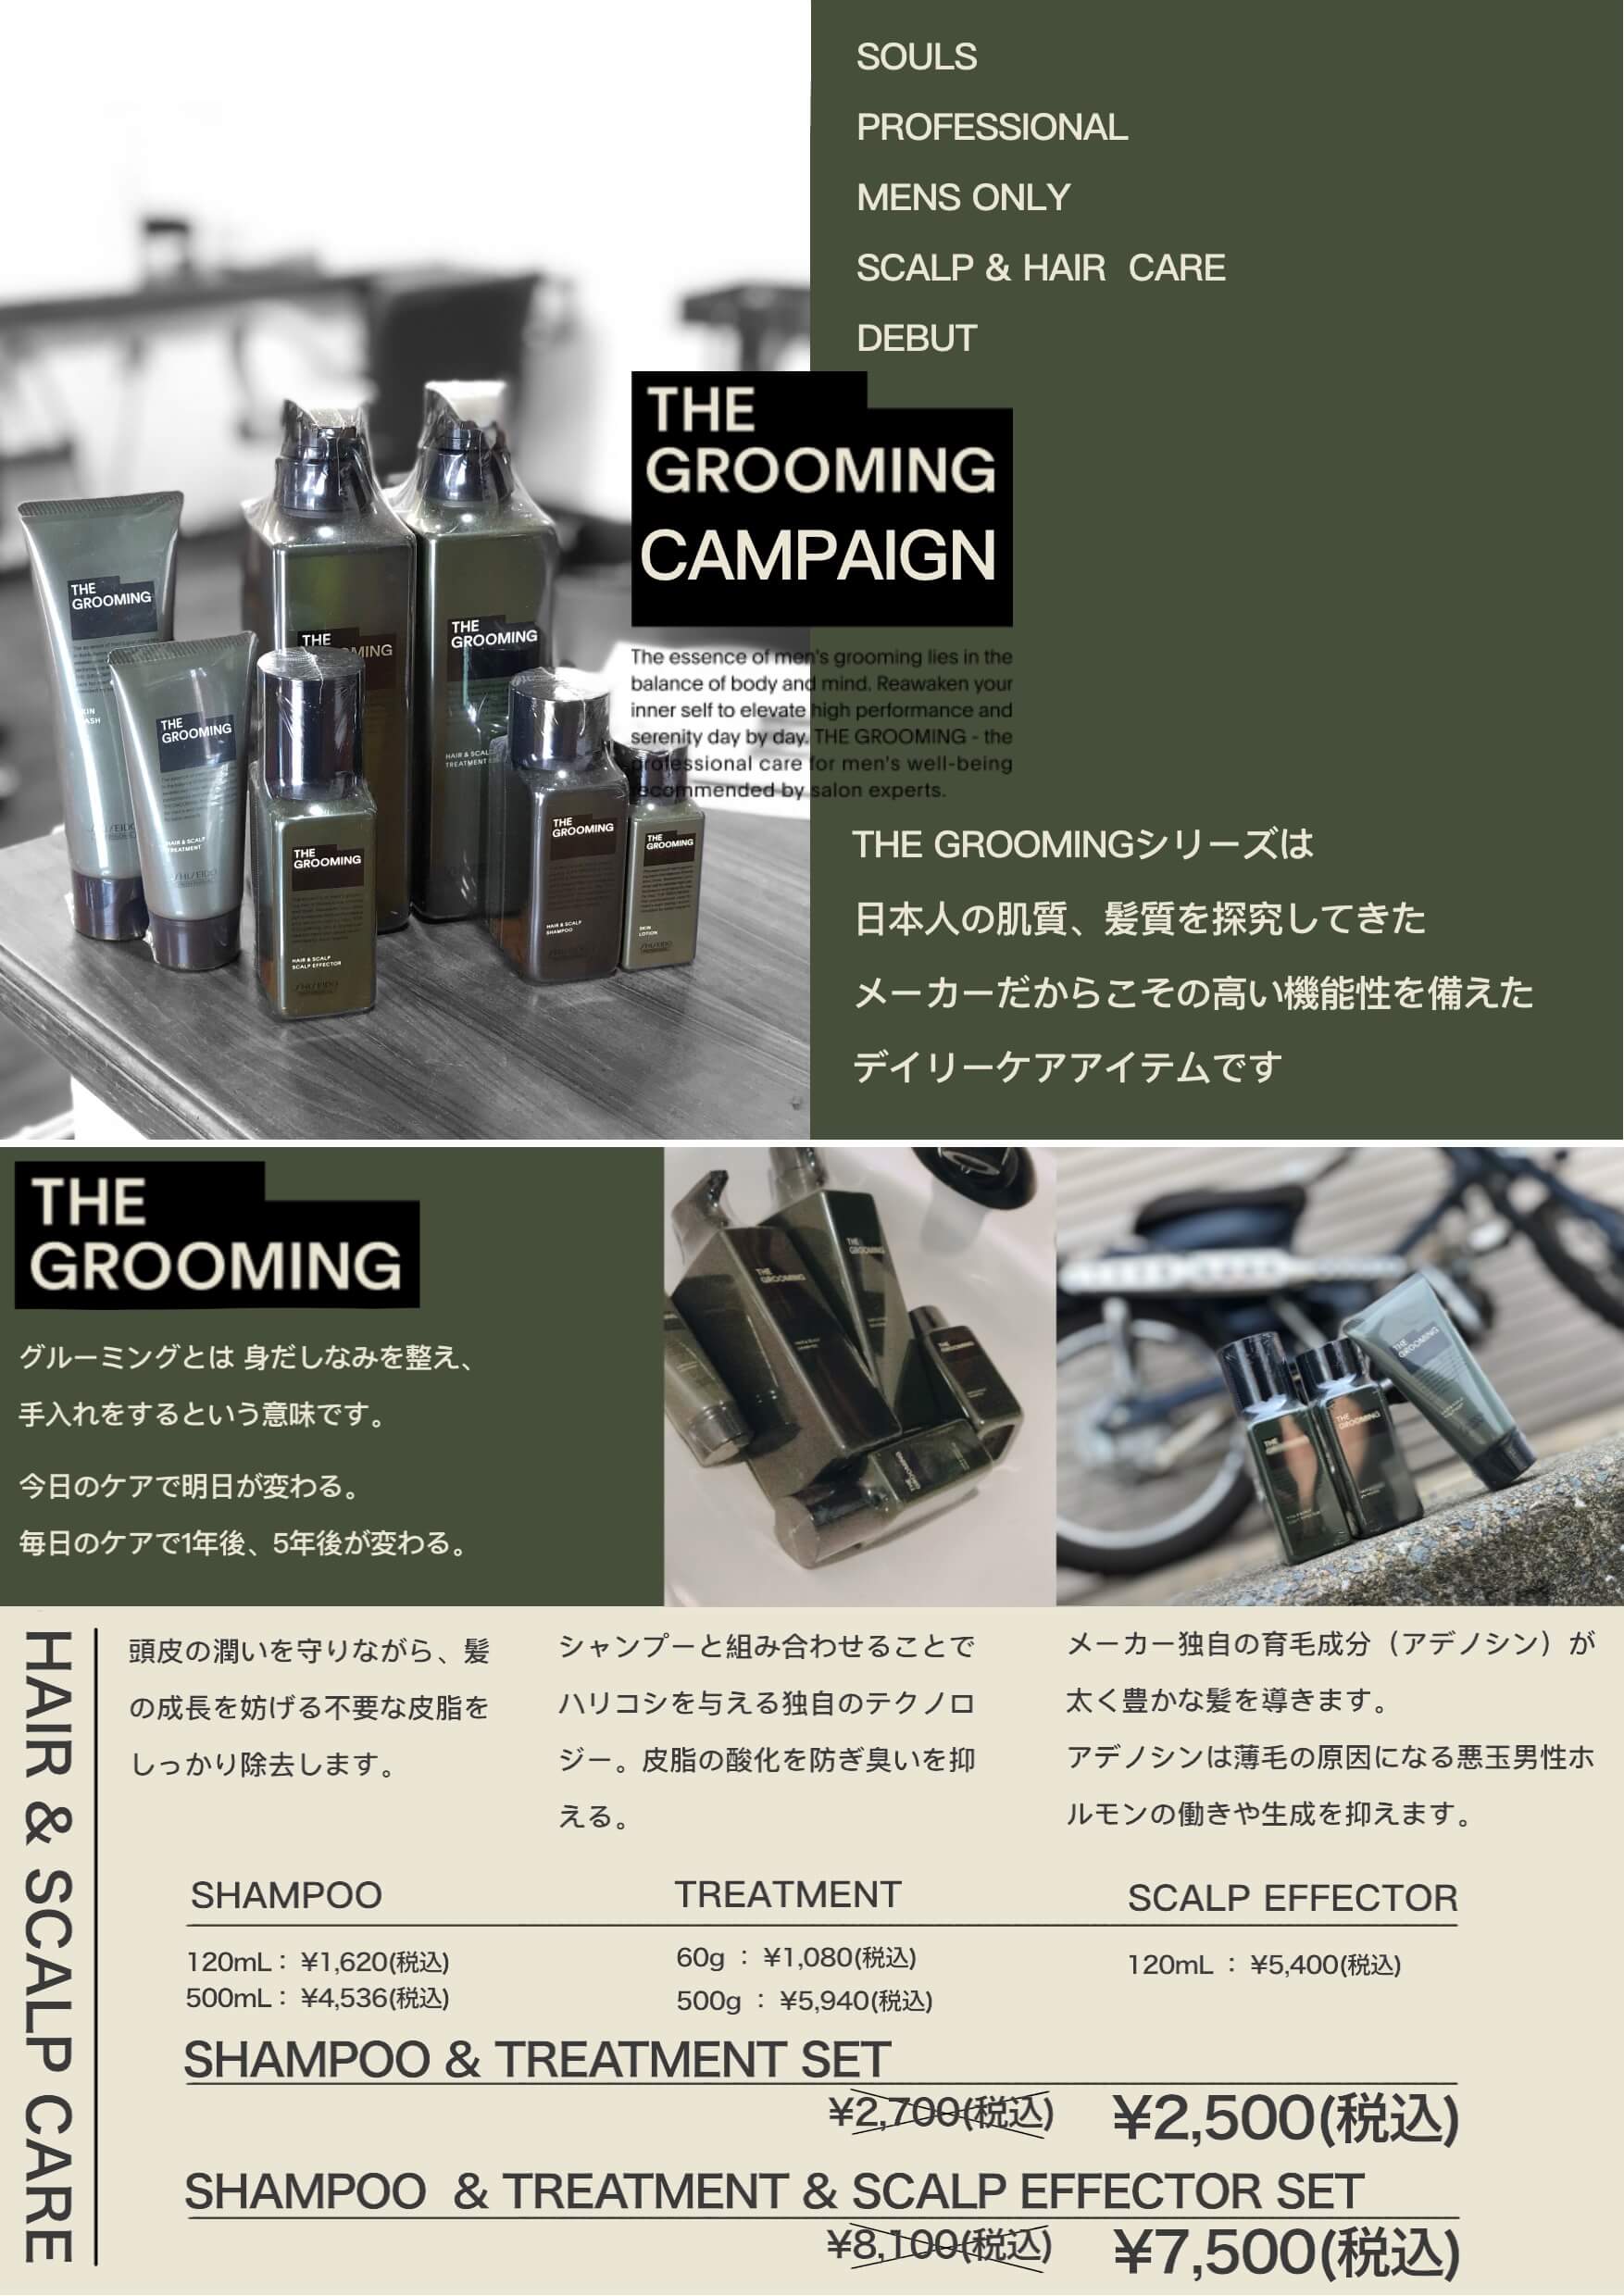 THE GROOMING CAMPAIGN